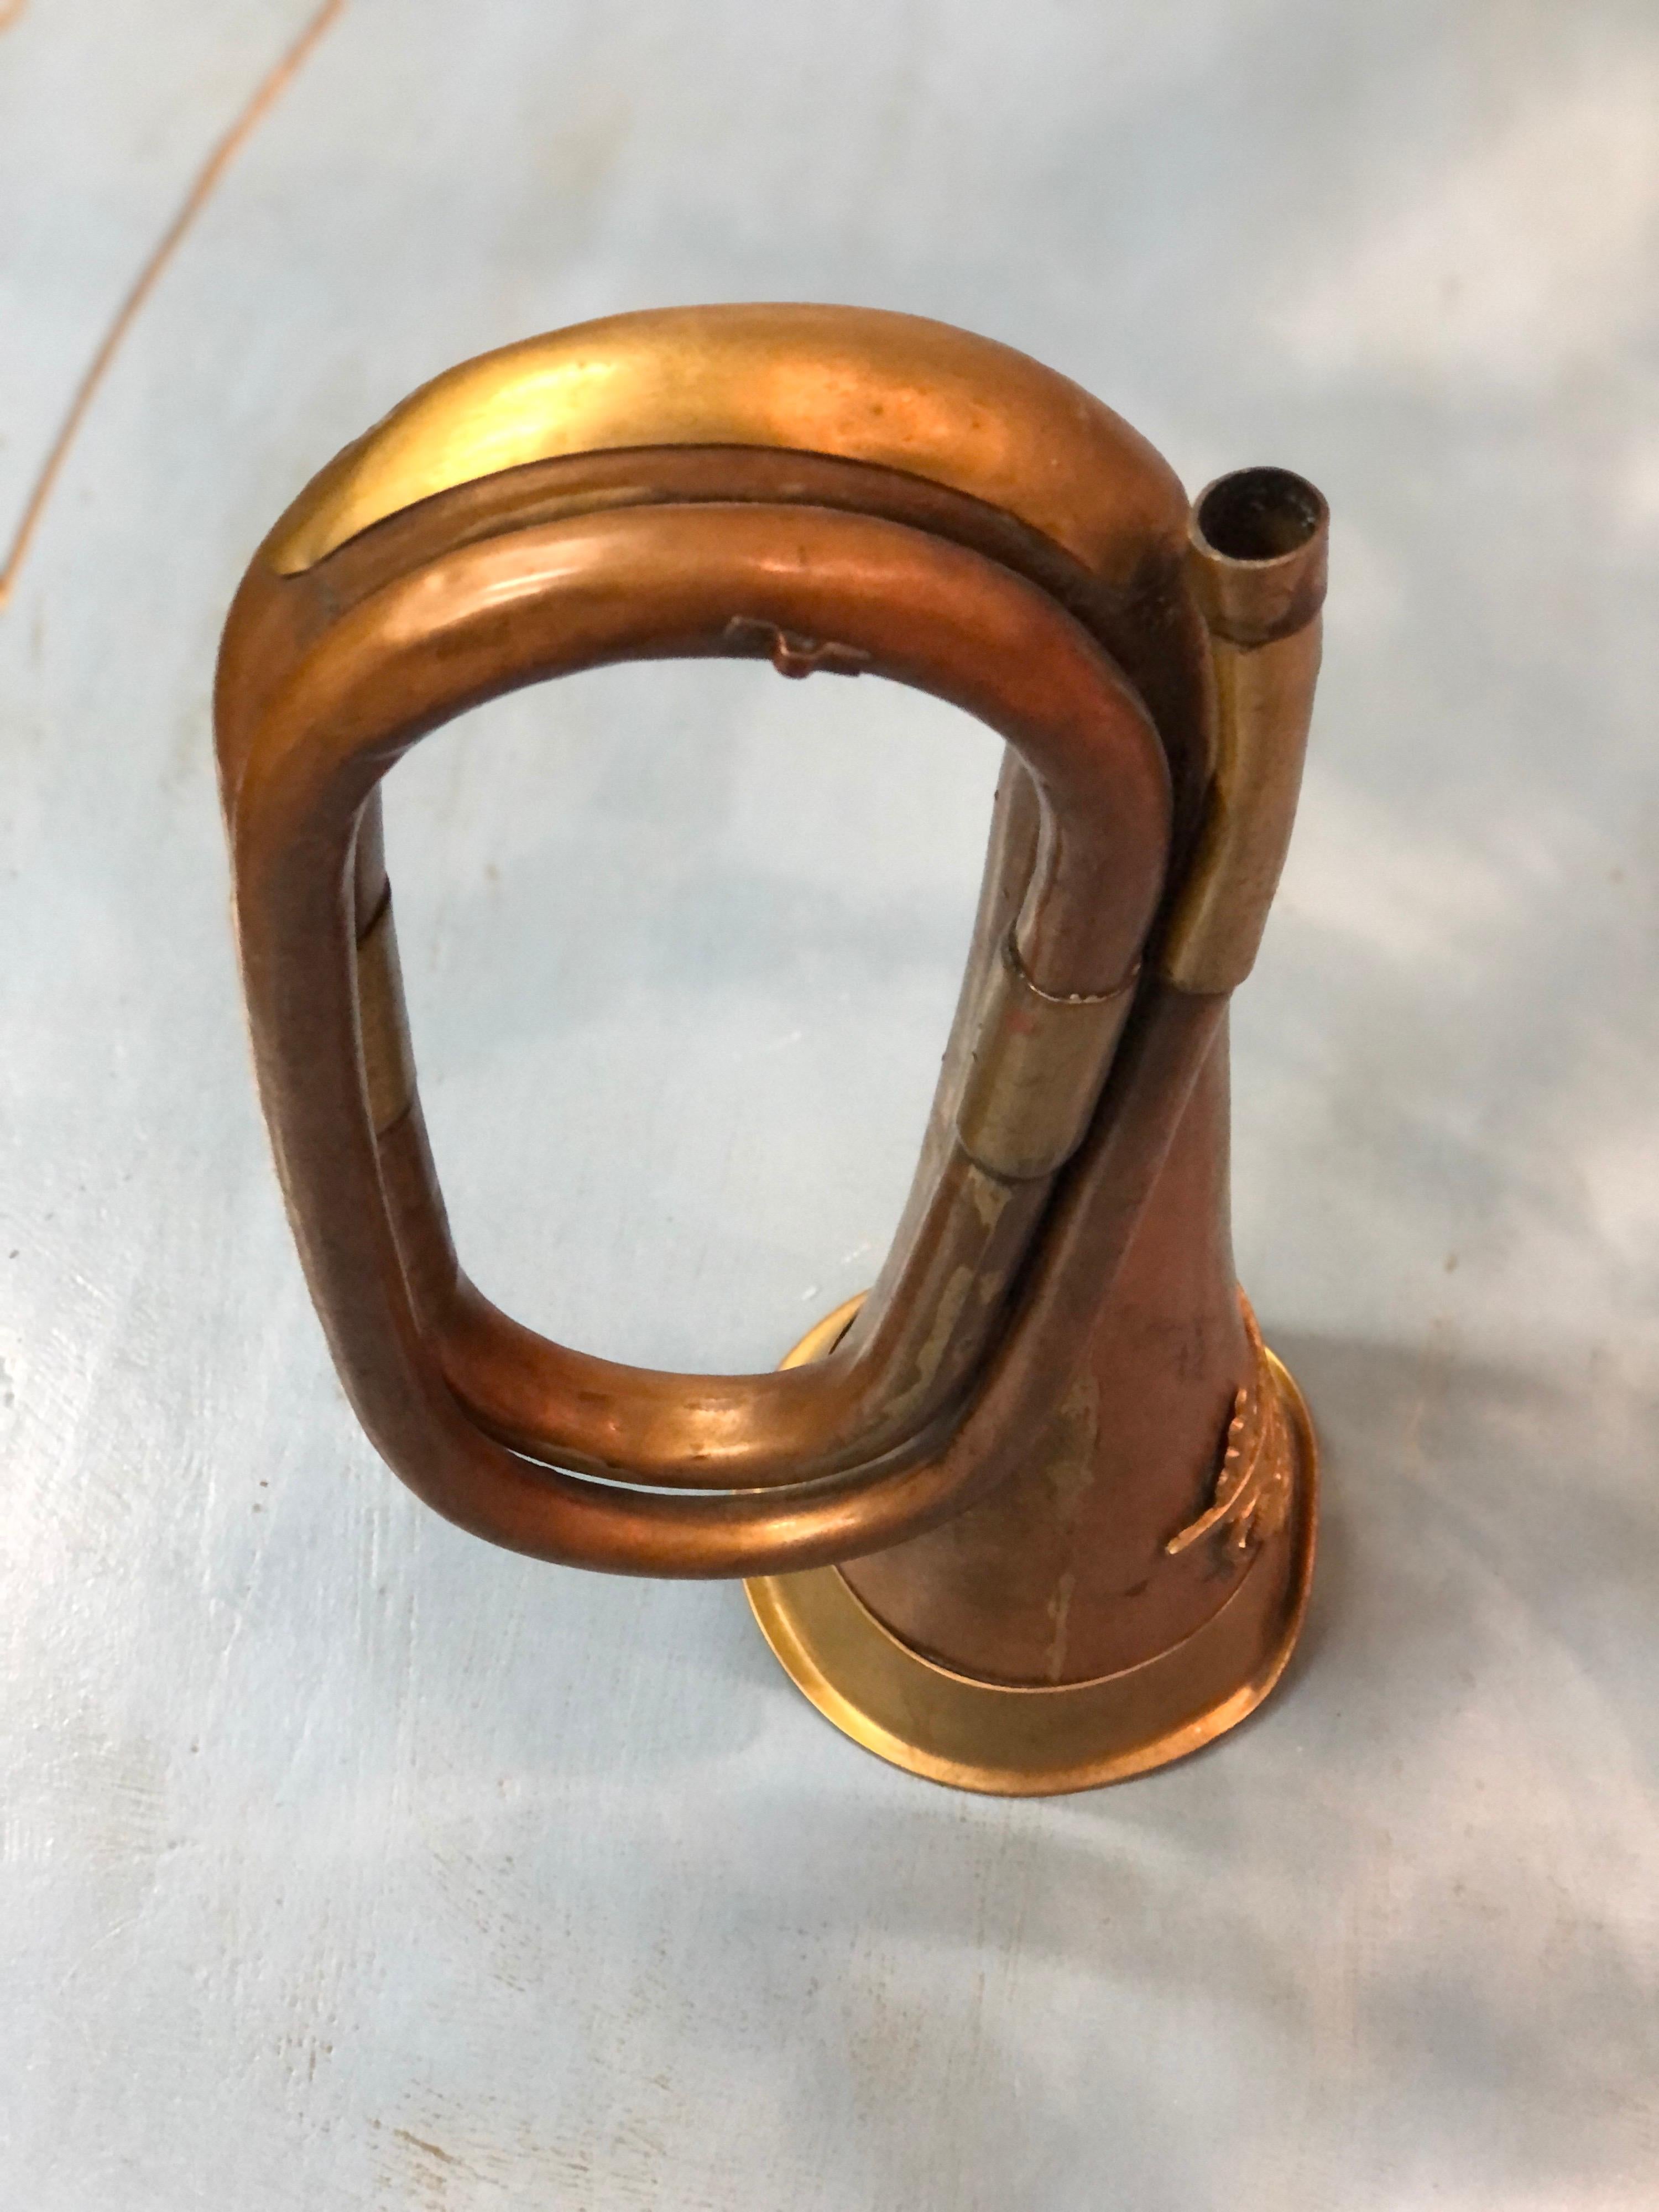 Small French military bugle made of brass and copper with missing mouthpiece.
France, circa 1900.